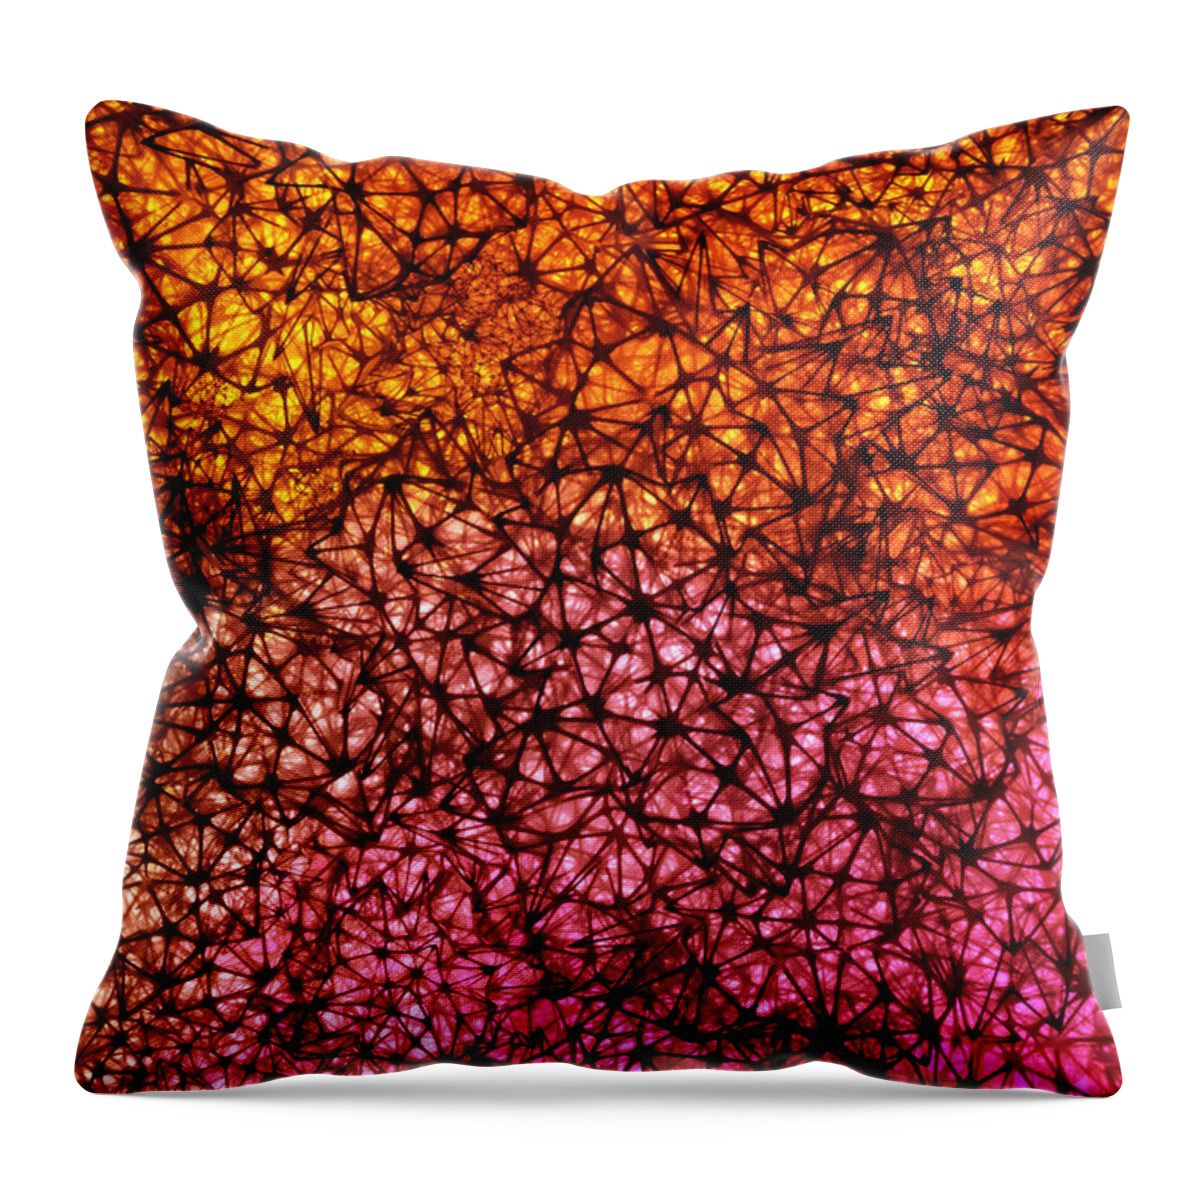 Abstracts Throw Pillow featuring the digital art 011915 by Matthew Lindley